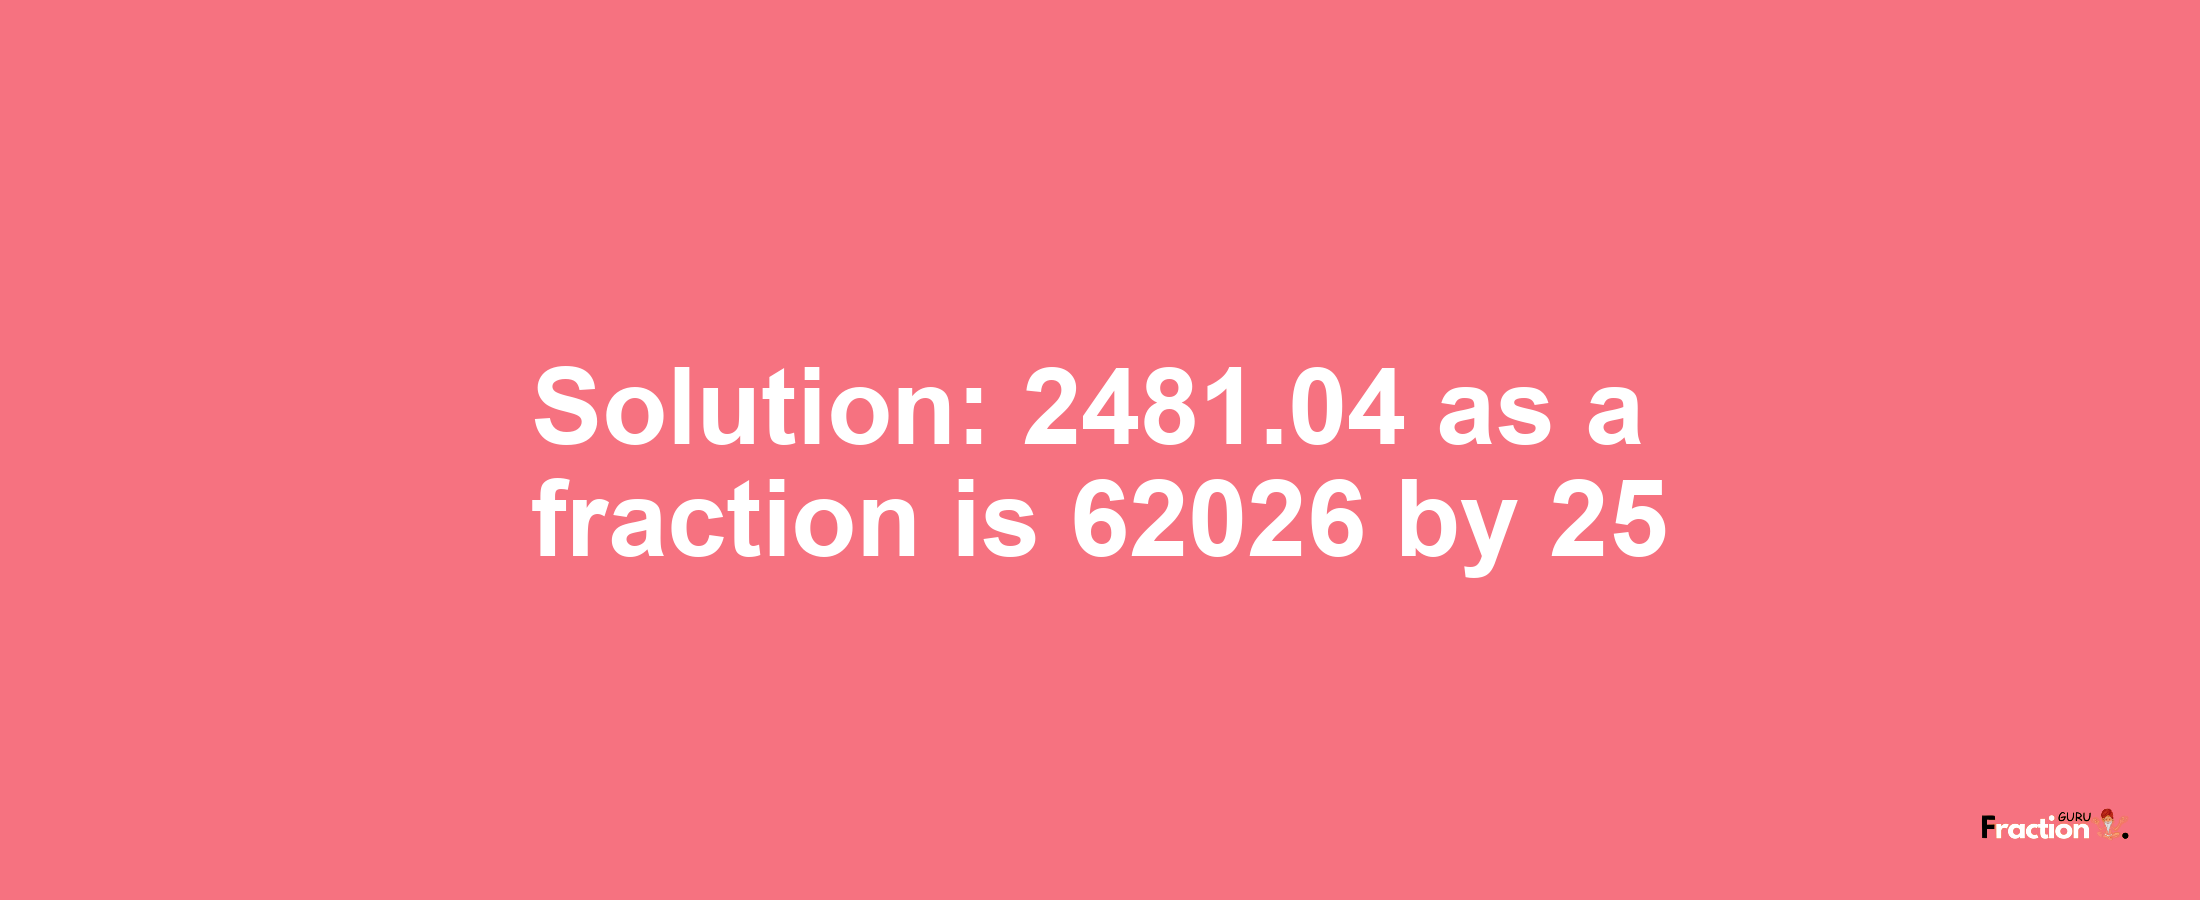 Solution:2481.04 as a fraction is 62026/25